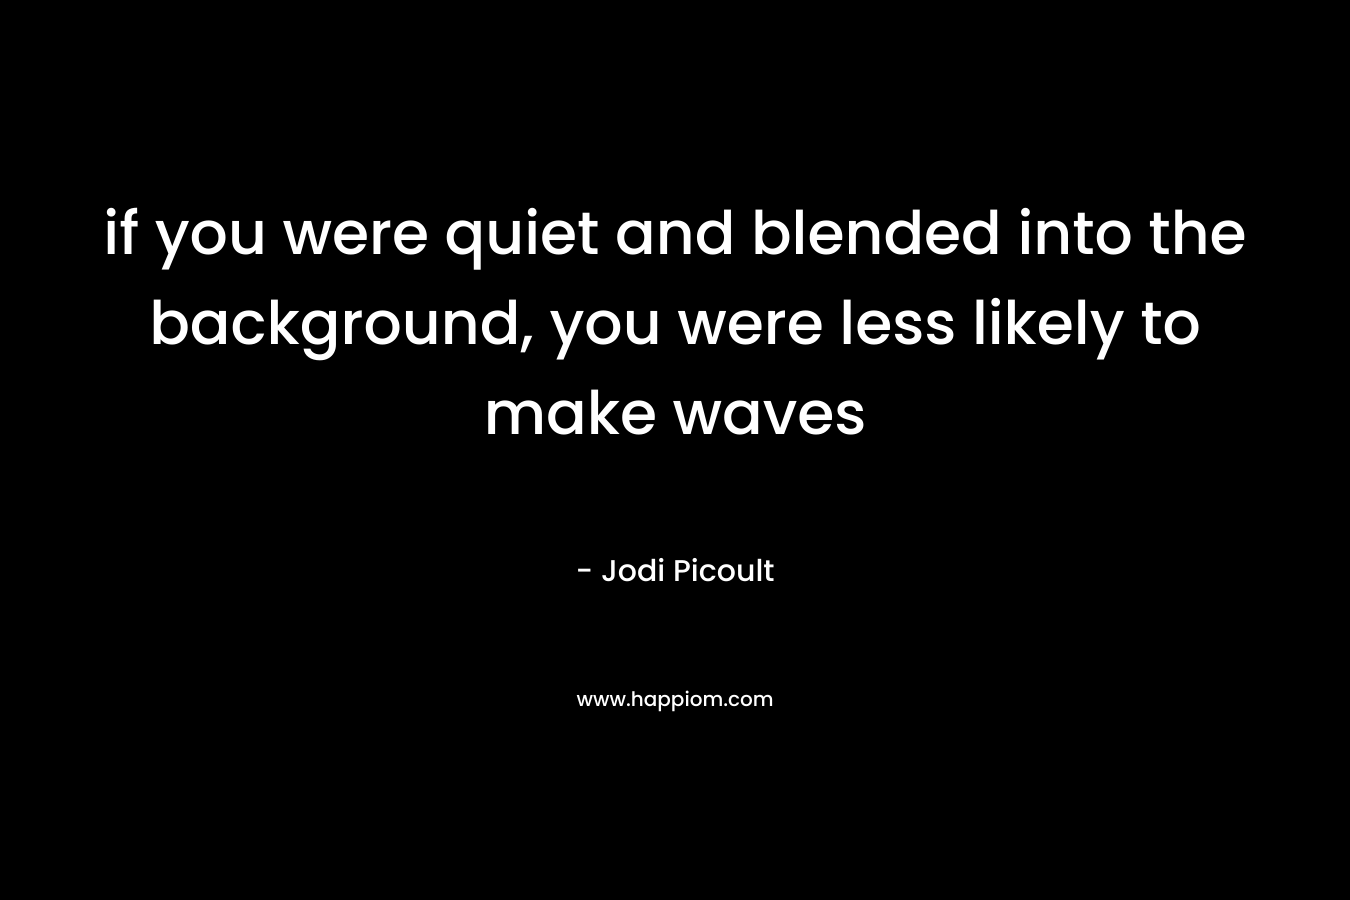 if you were quiet and blended into the background, you were less likely to make waves – Jodi Picoult